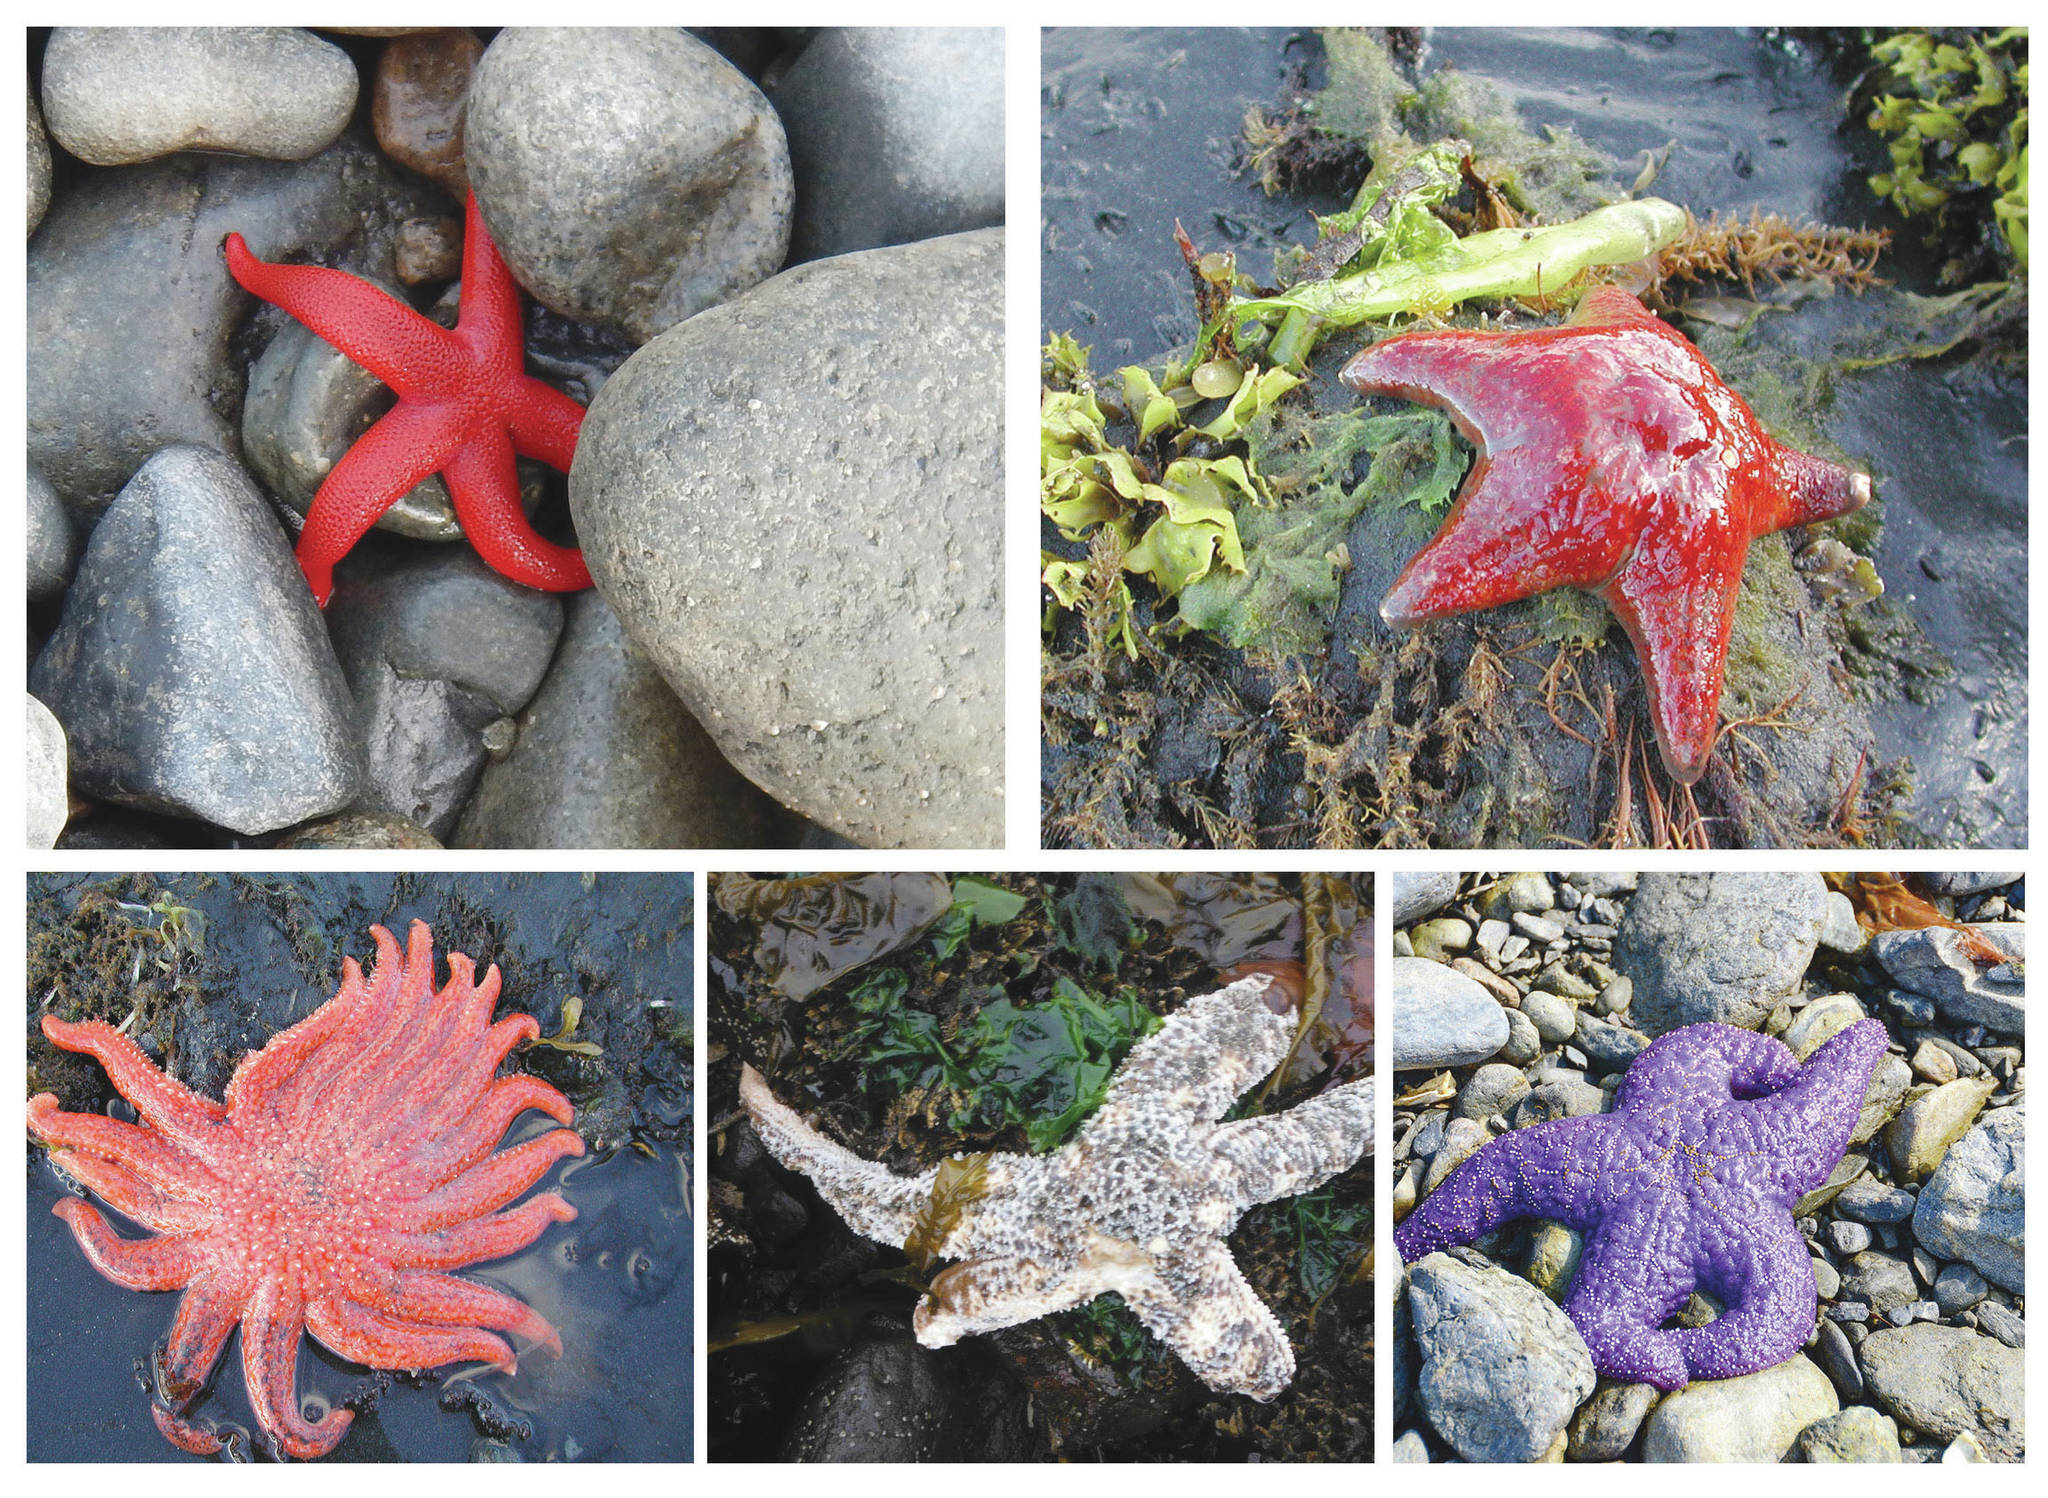 Photos courtesy of Mandy Lindeberg, NOAA, and Brenda Konar, University of Alaska Fairbanks 
Blood stars (top left) and leather stars (top right) were less impacted by the disease and are more likely to be seen today. Sunflower sea stars (bottom left), mottled sea stars (lower center, this one showing symptoms of disease) and ochre sea stars (lower right) used to be common, but were most affected by the disease and have become more rare.